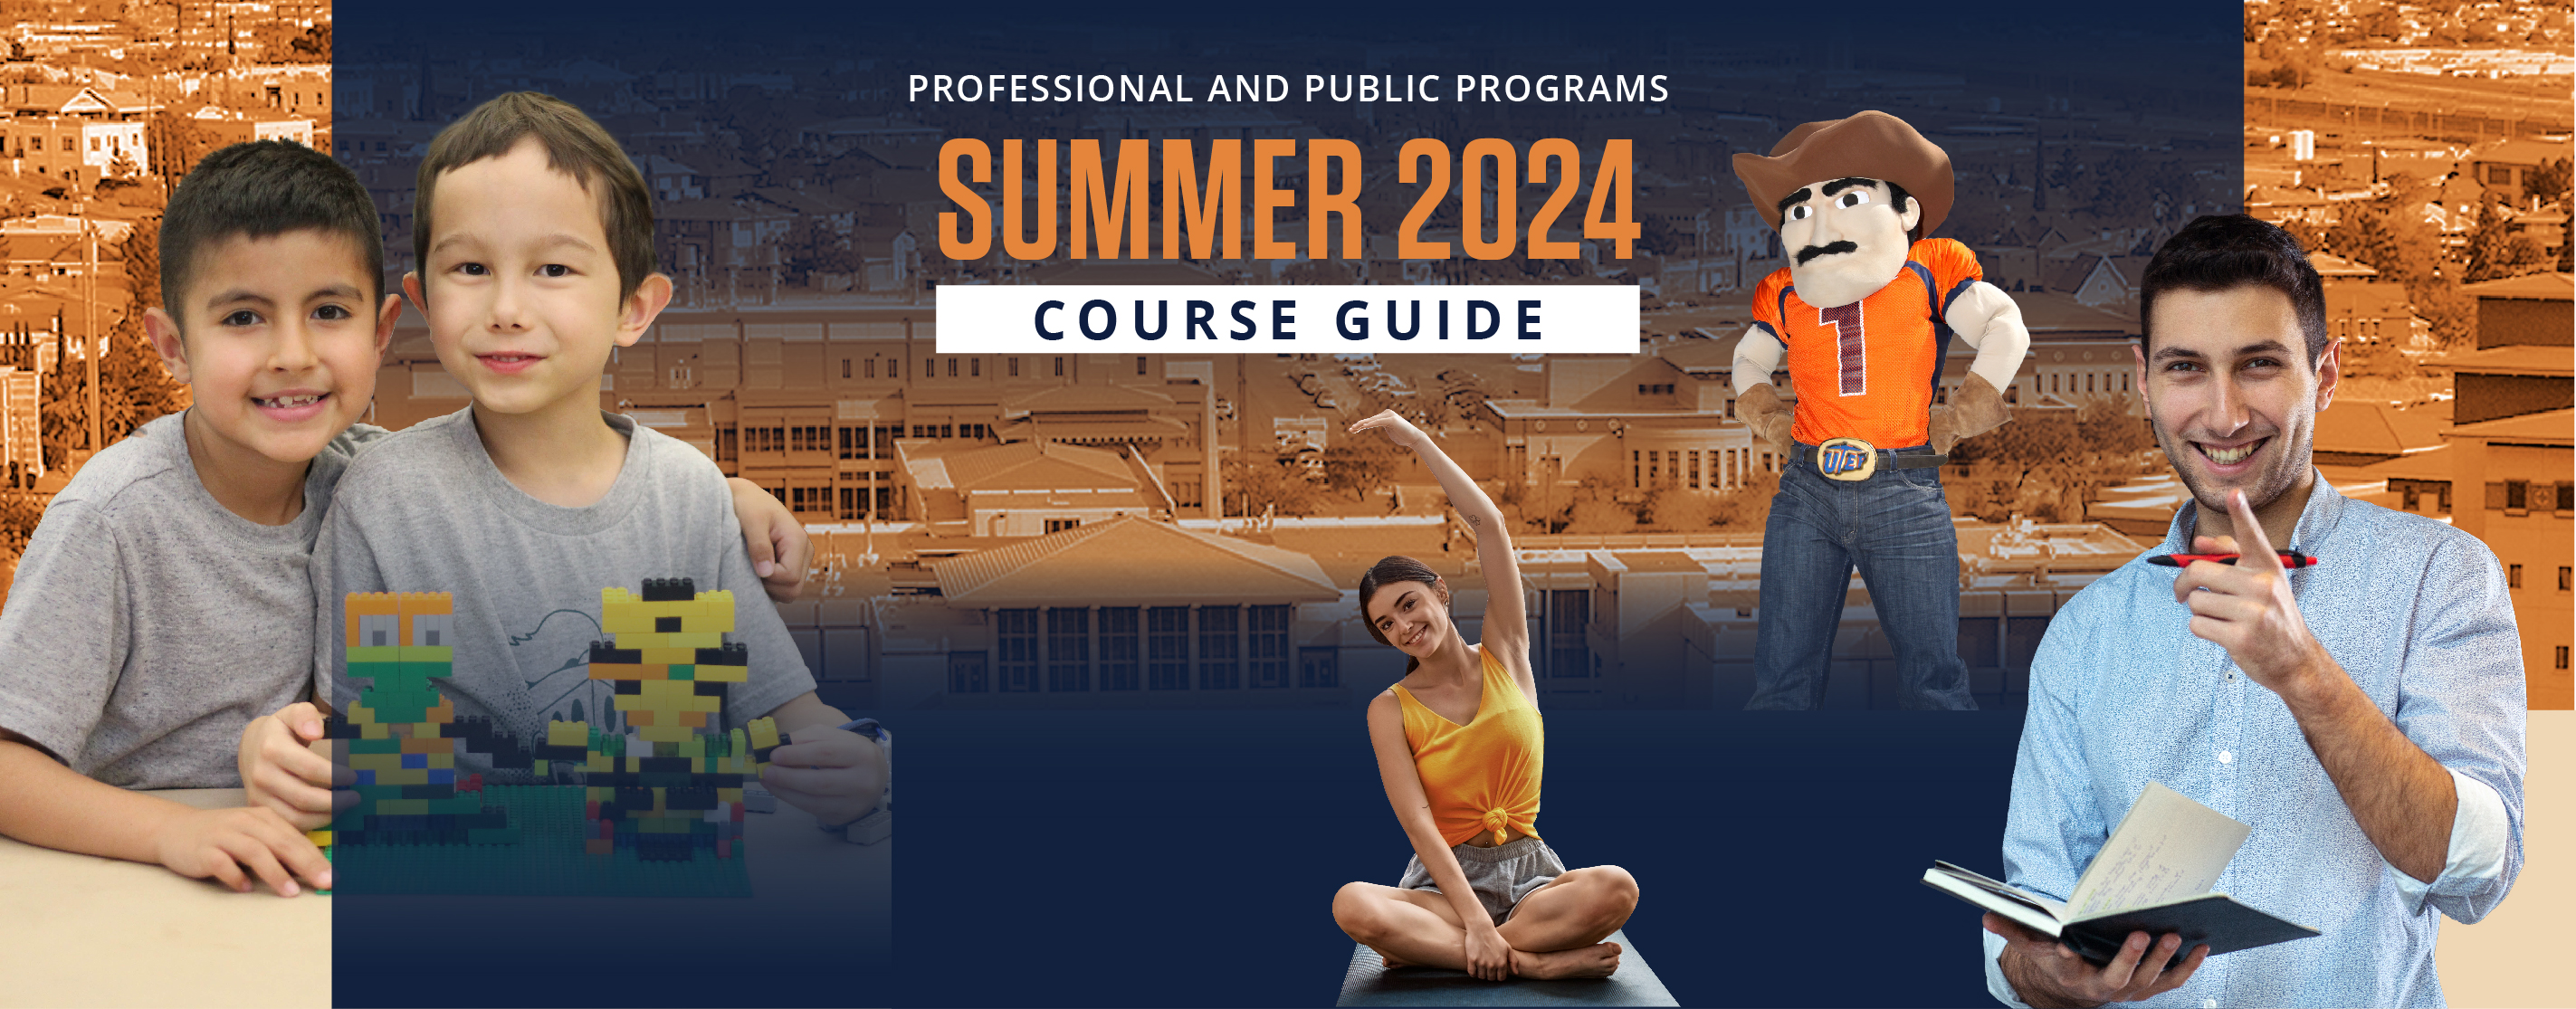 Flip Through or Download the Summer 2024 Course Guide  